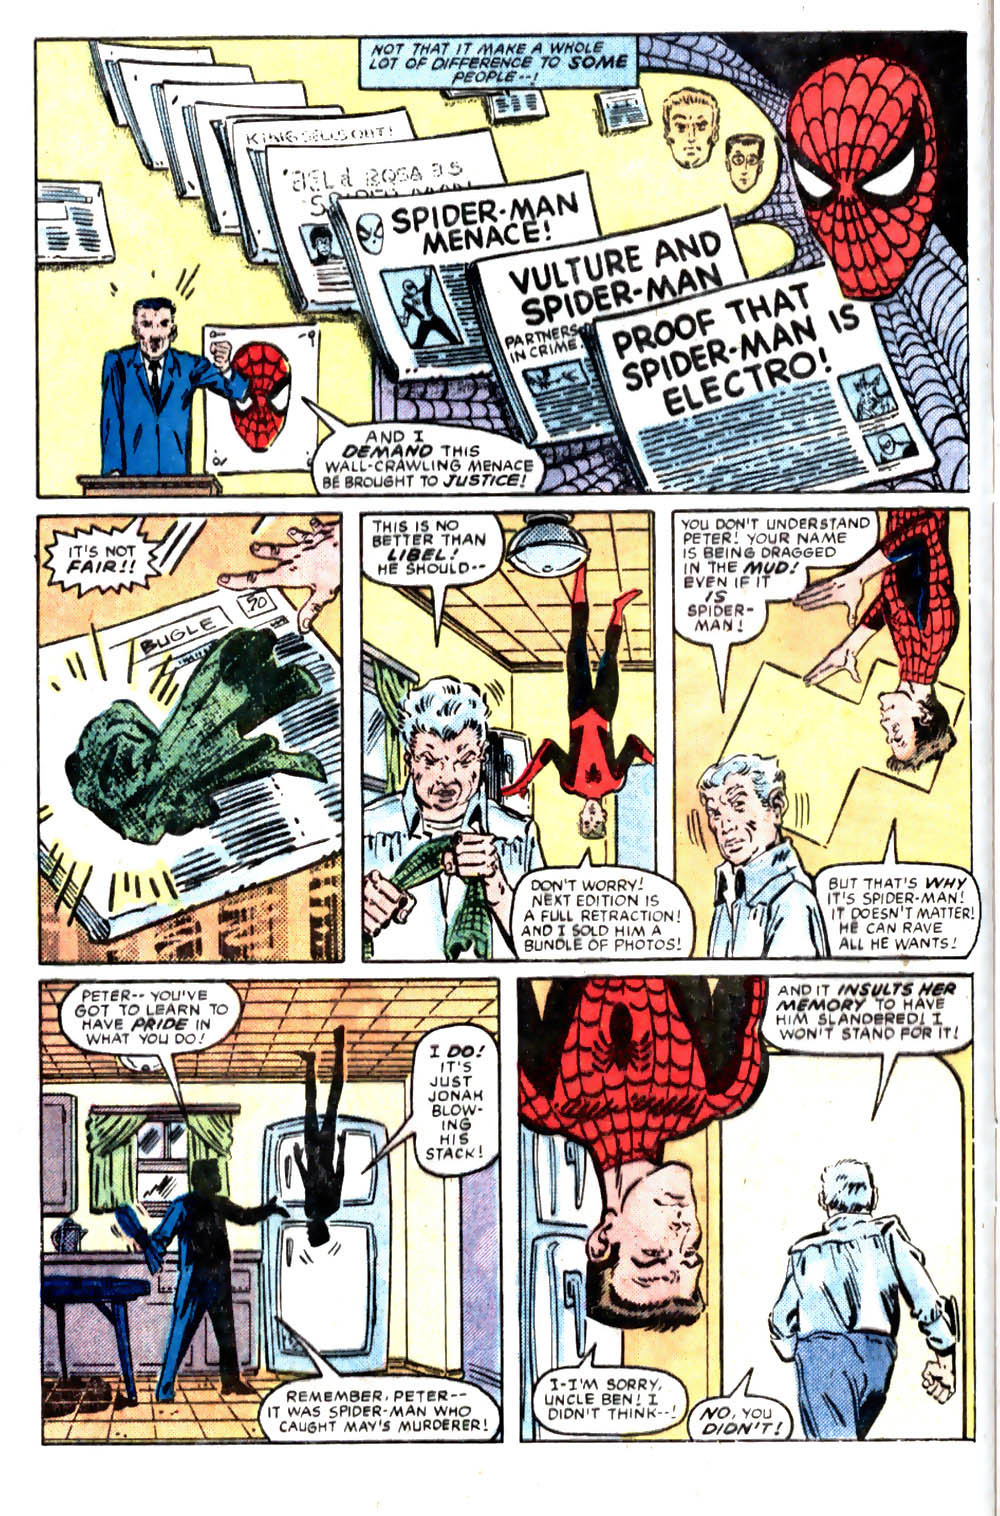 What If? (1977) issue 46 - Spiderman's uncle ben had lived - Page 15